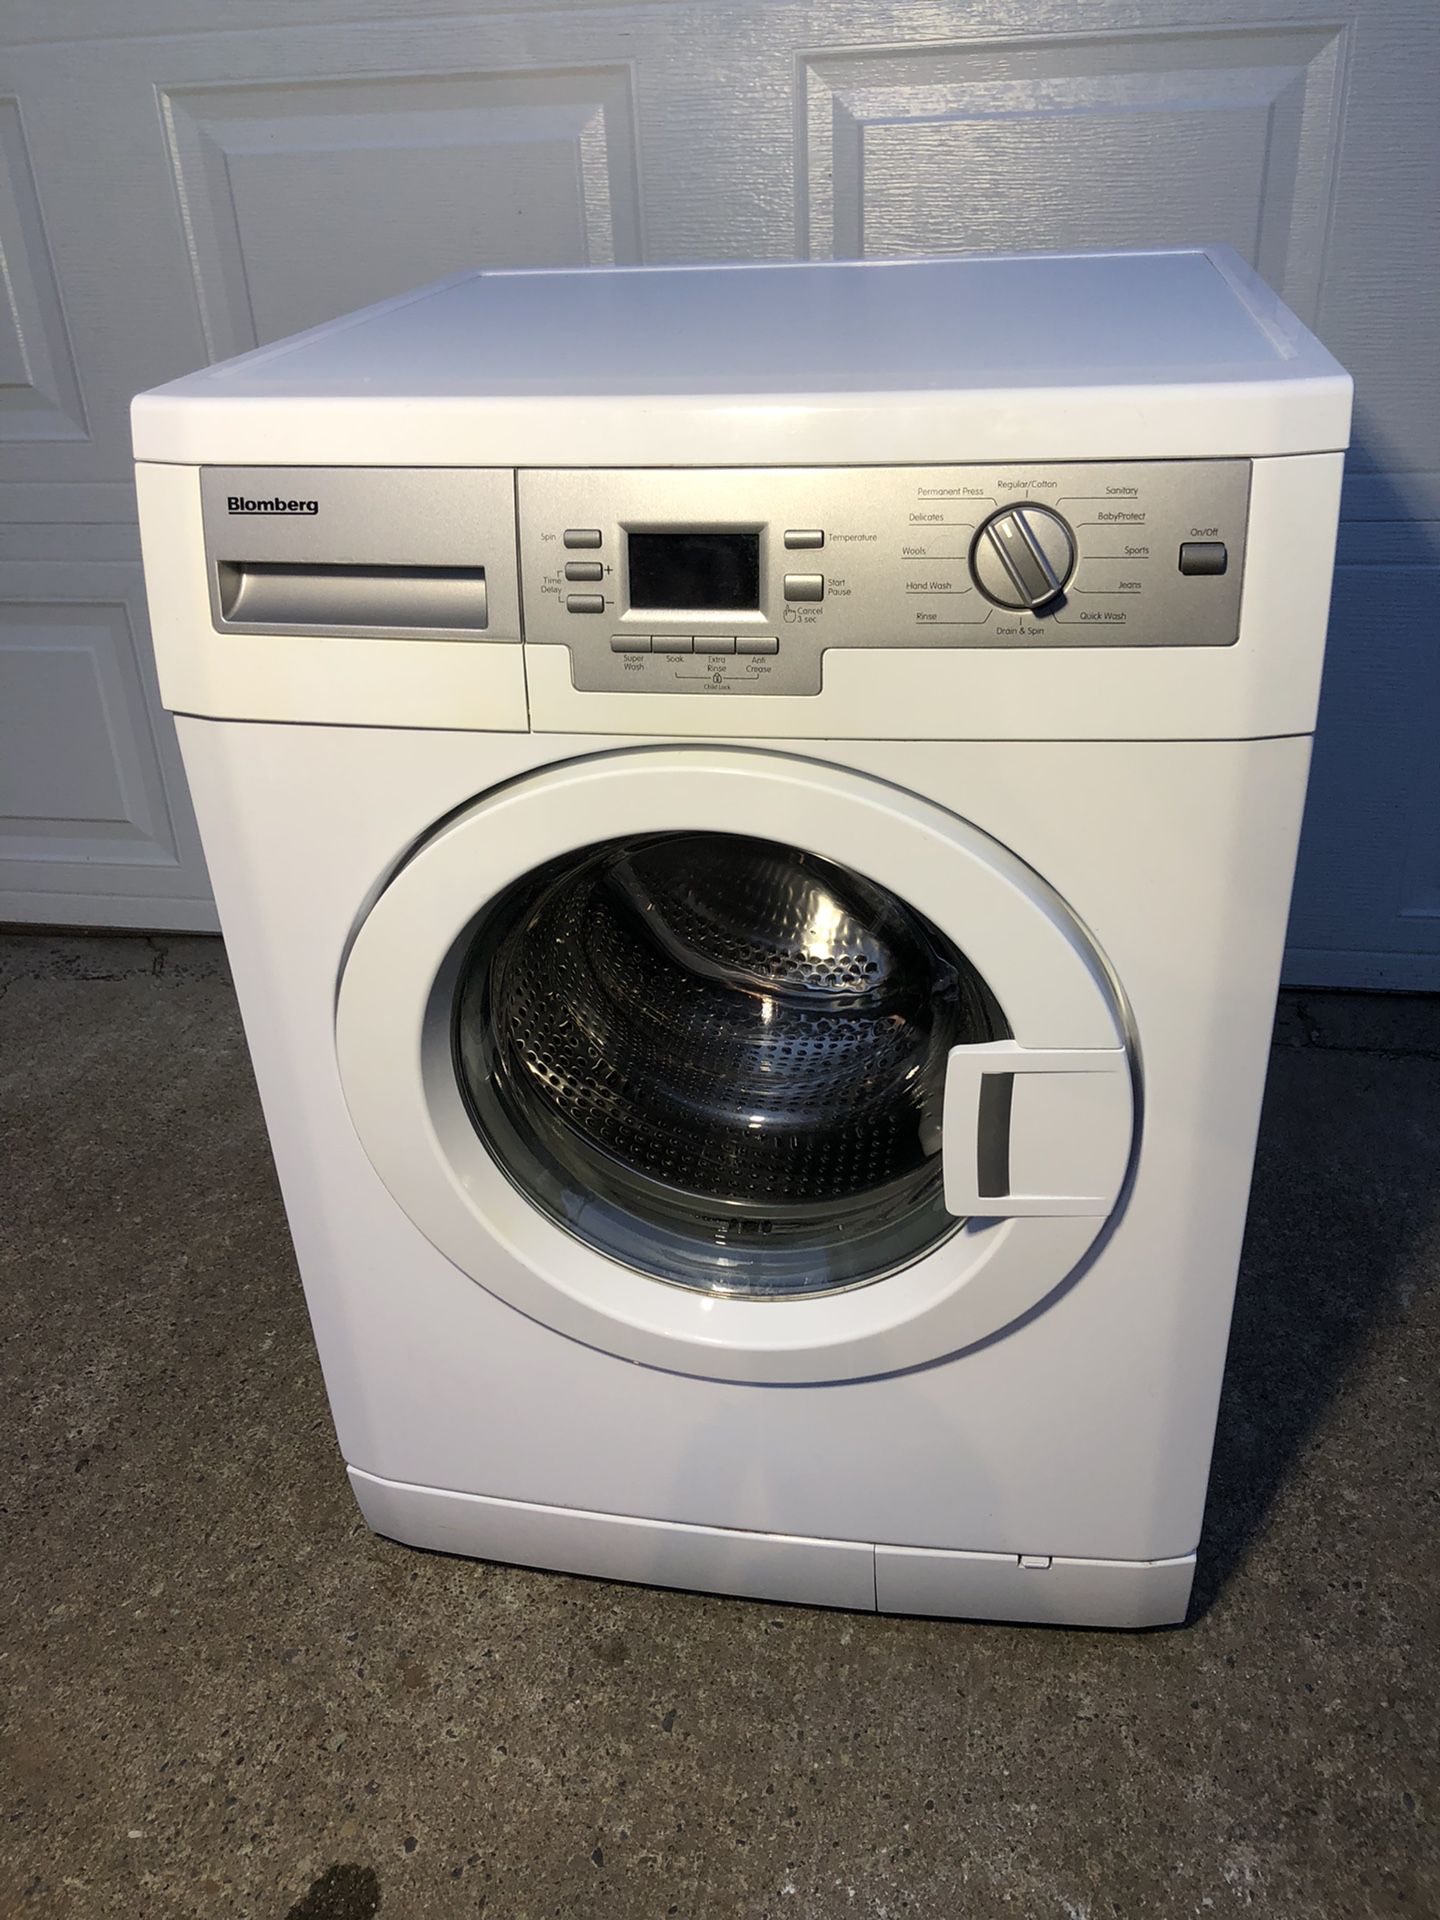 24” Wide Blomberg Washer 